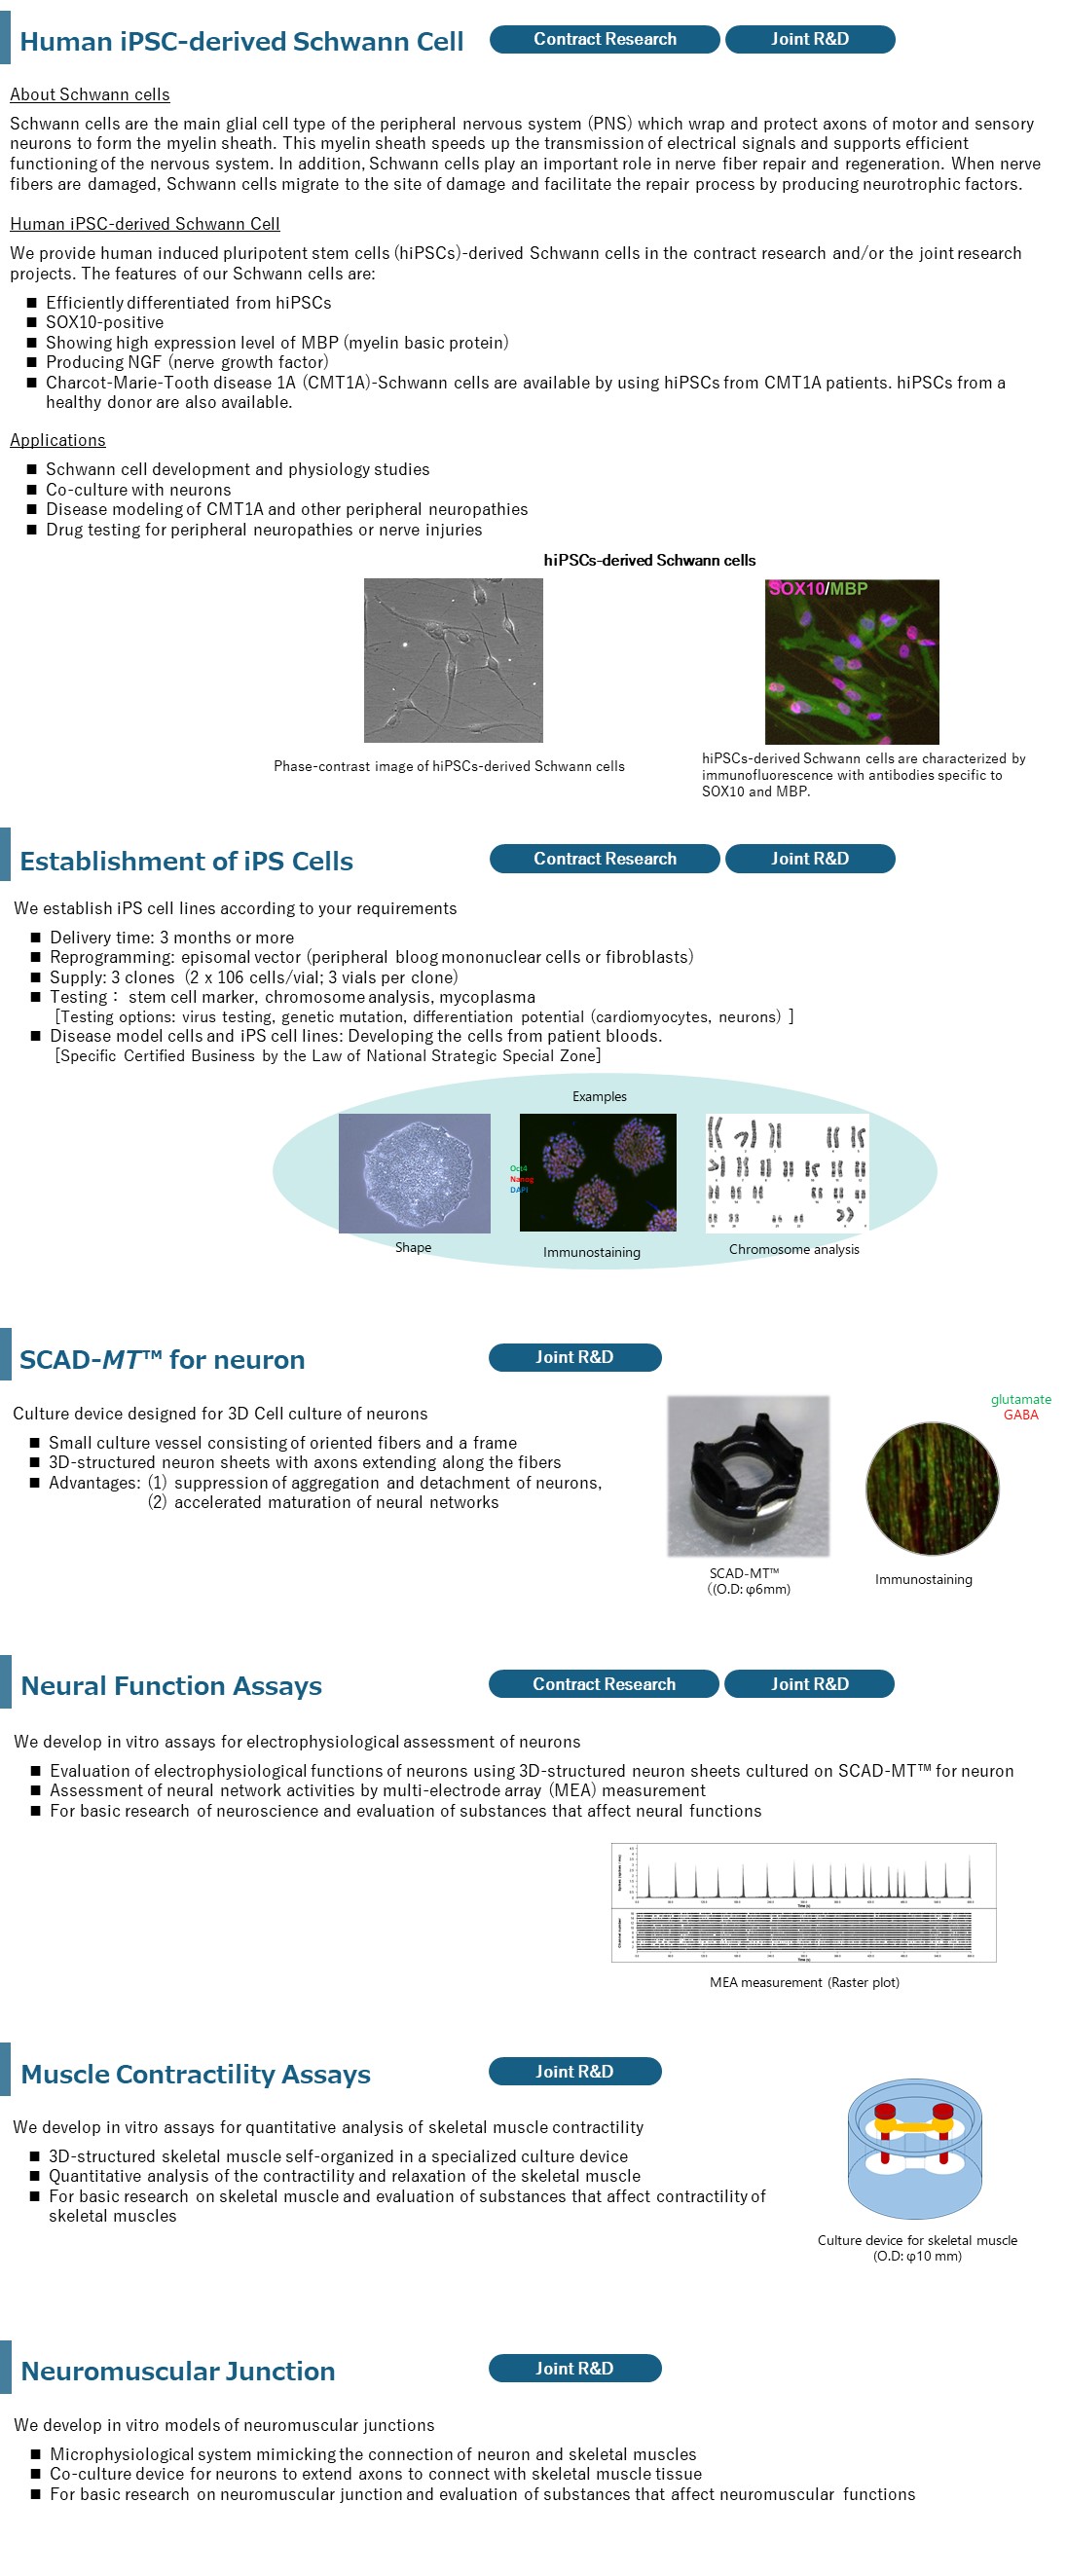 iPS cells, establishment, neuron, device, neural function, muscle contractility, assay, neuromuscular junction, skeletal muscle, axons, evaluation, in vitro